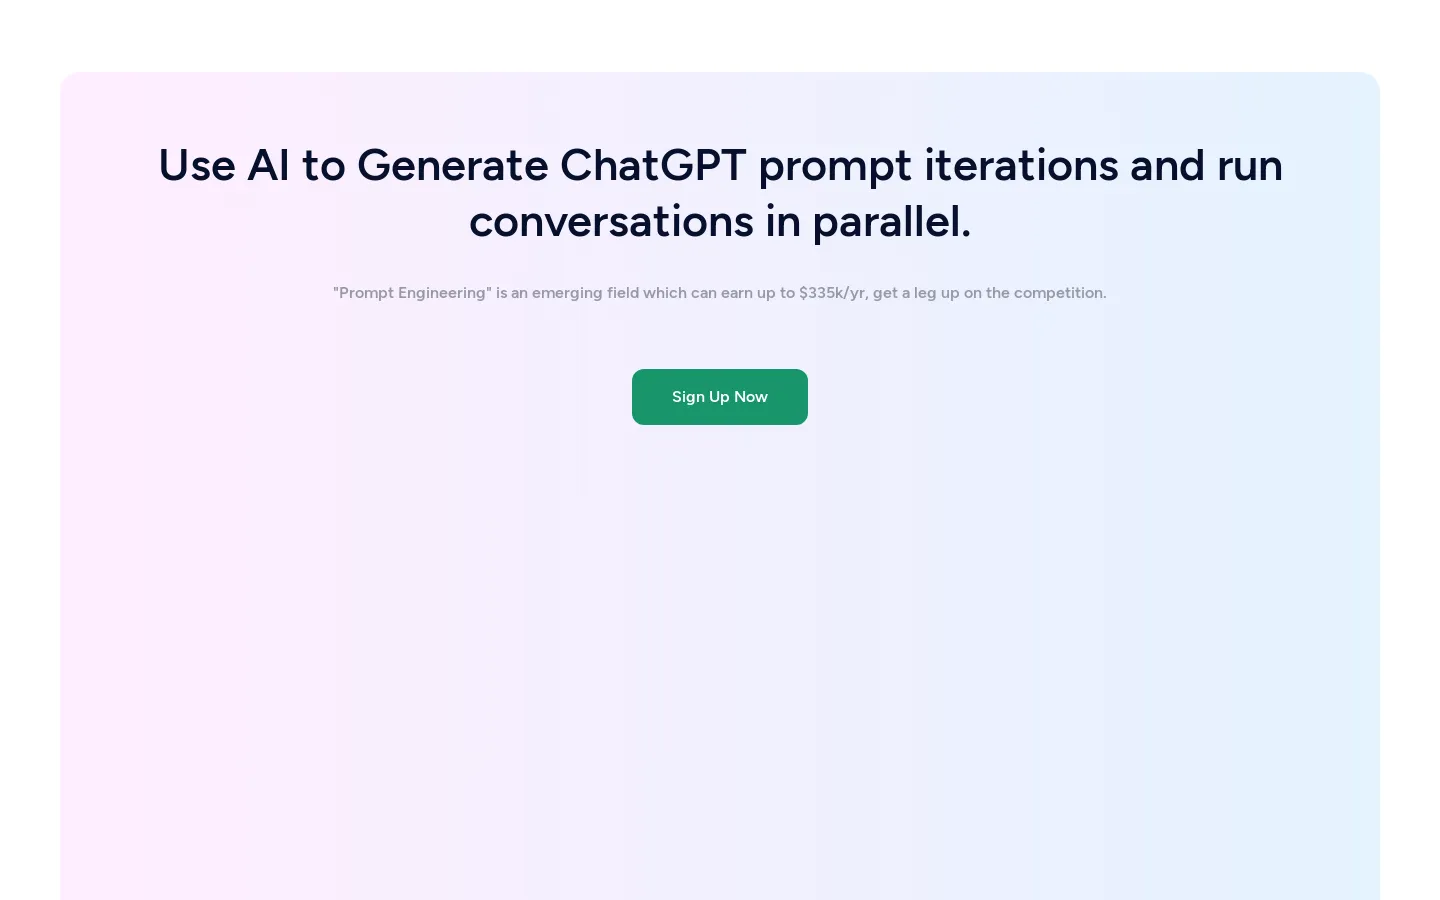 Use AI to improve ChatGPT prompts - GPT Prompt Tuner